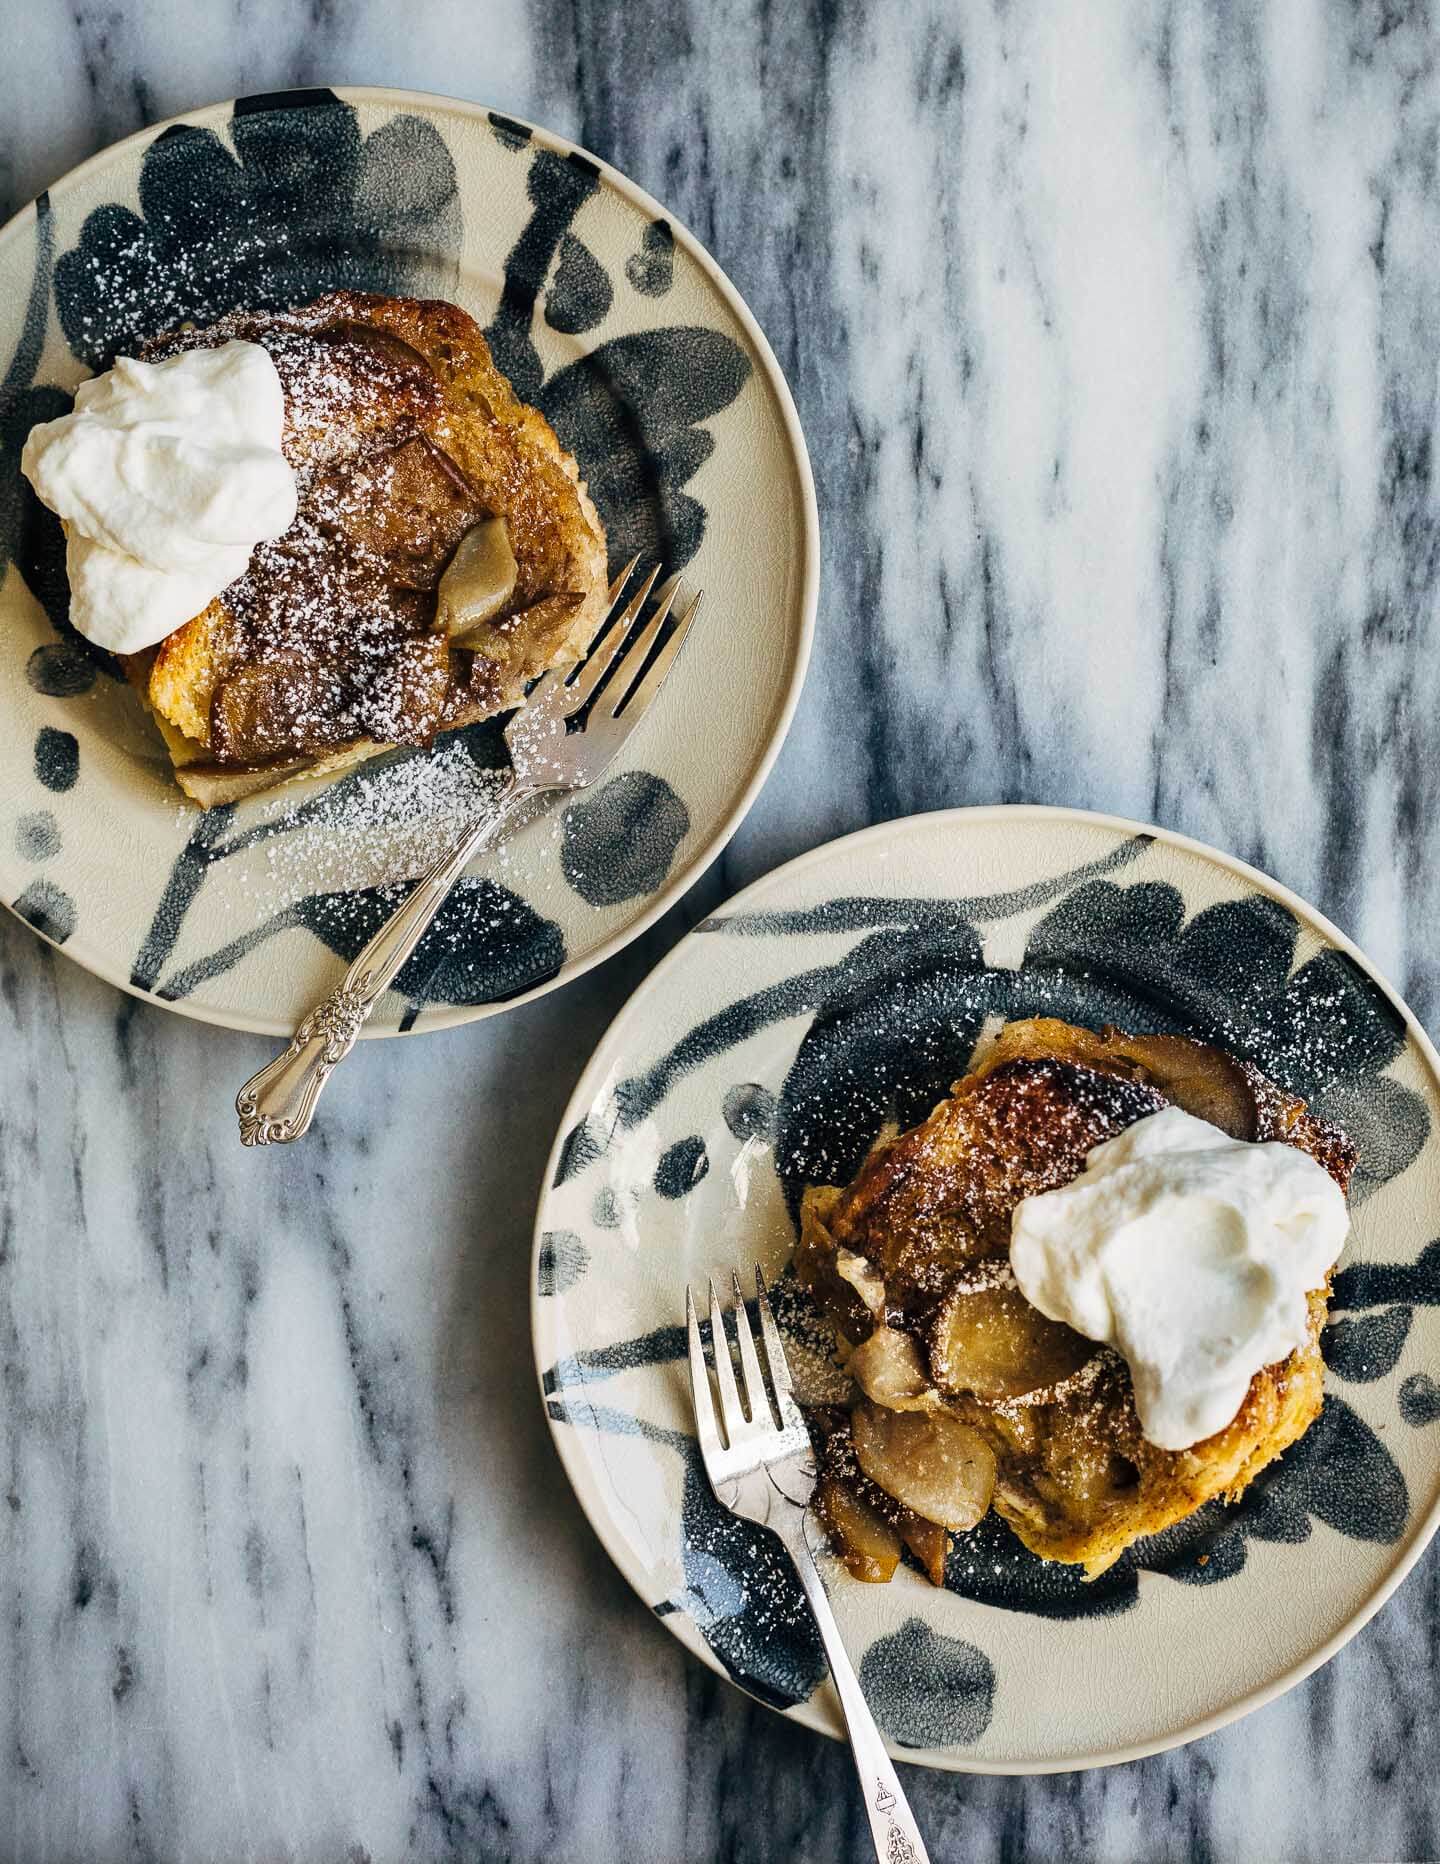 Seckel pears sautéed in brown butter syrup and slices of brioche dipped in cinnamon sugar elevate this simple seckel pear bread pudding recipe. 